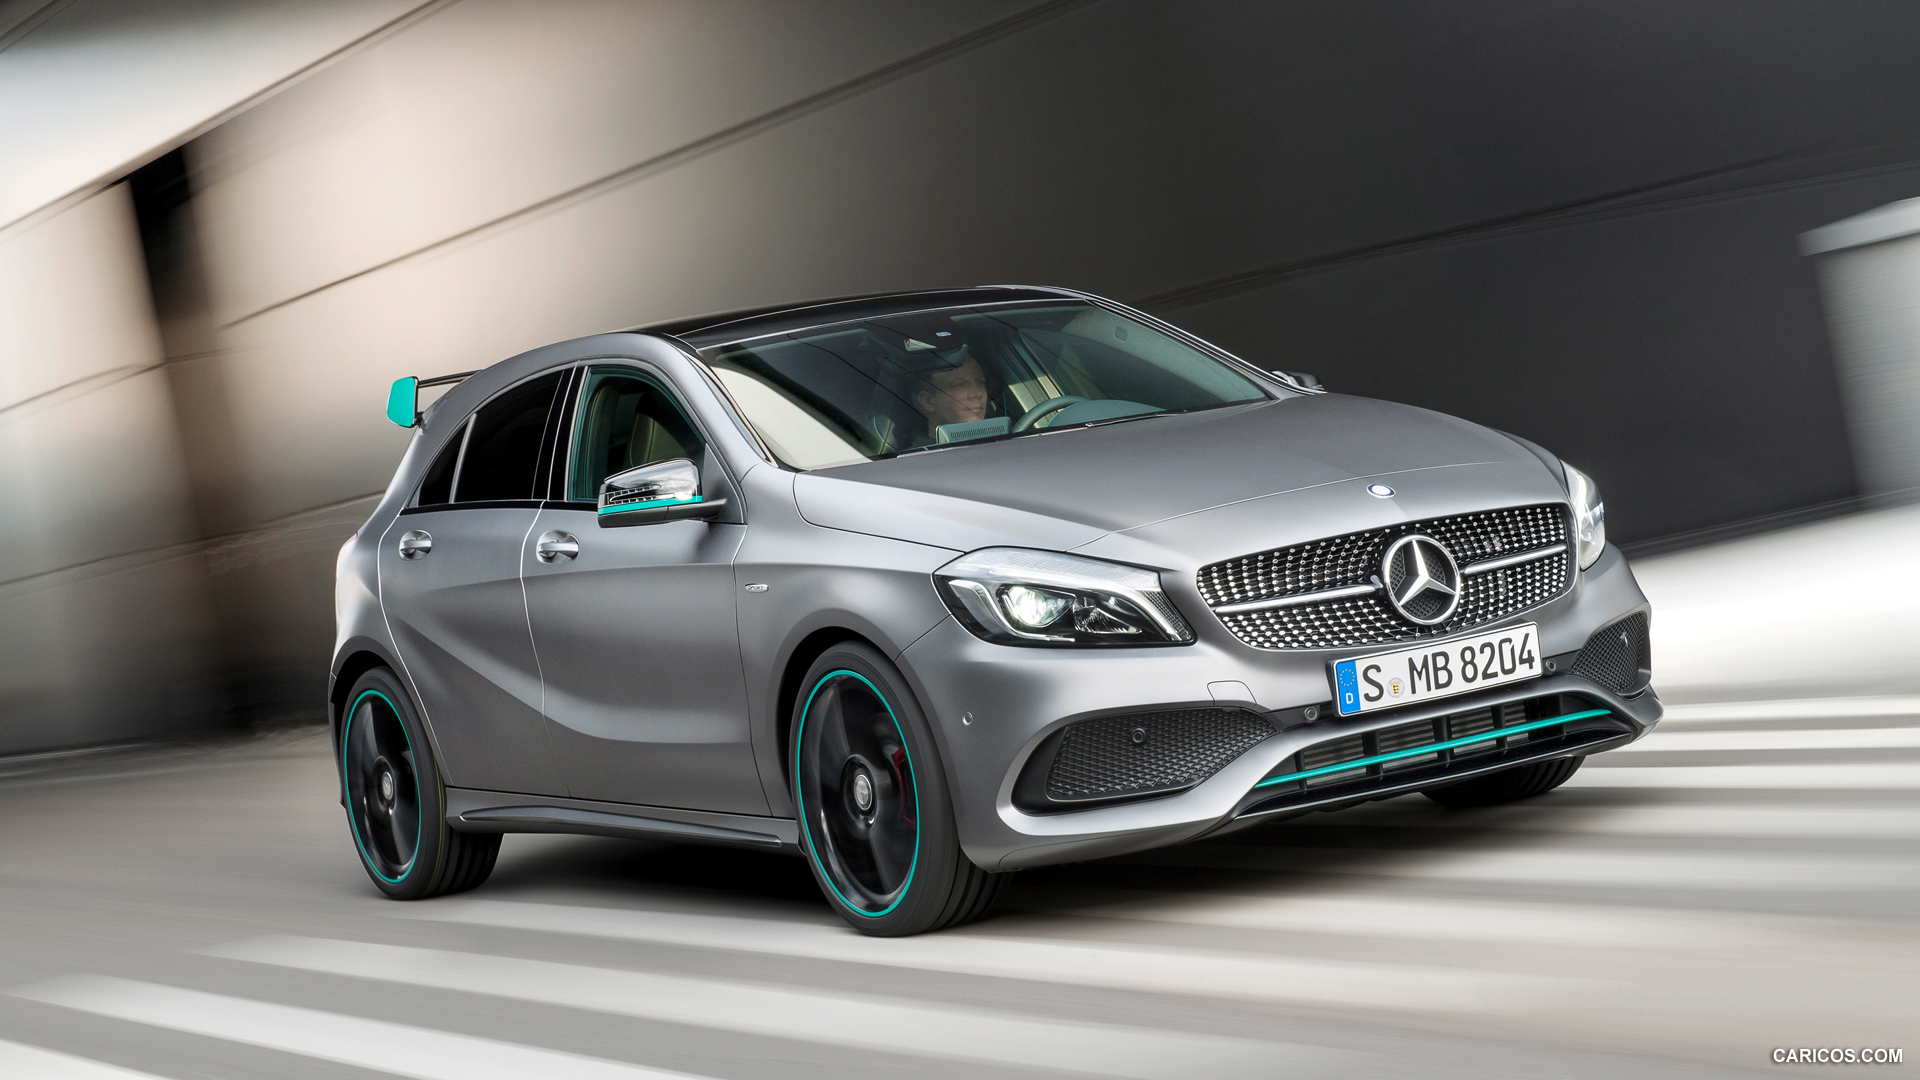 2016 Mercedes-Benz A-Class A 250 Motorsport Edition (Mountain Grey) - Front, #17 of 43